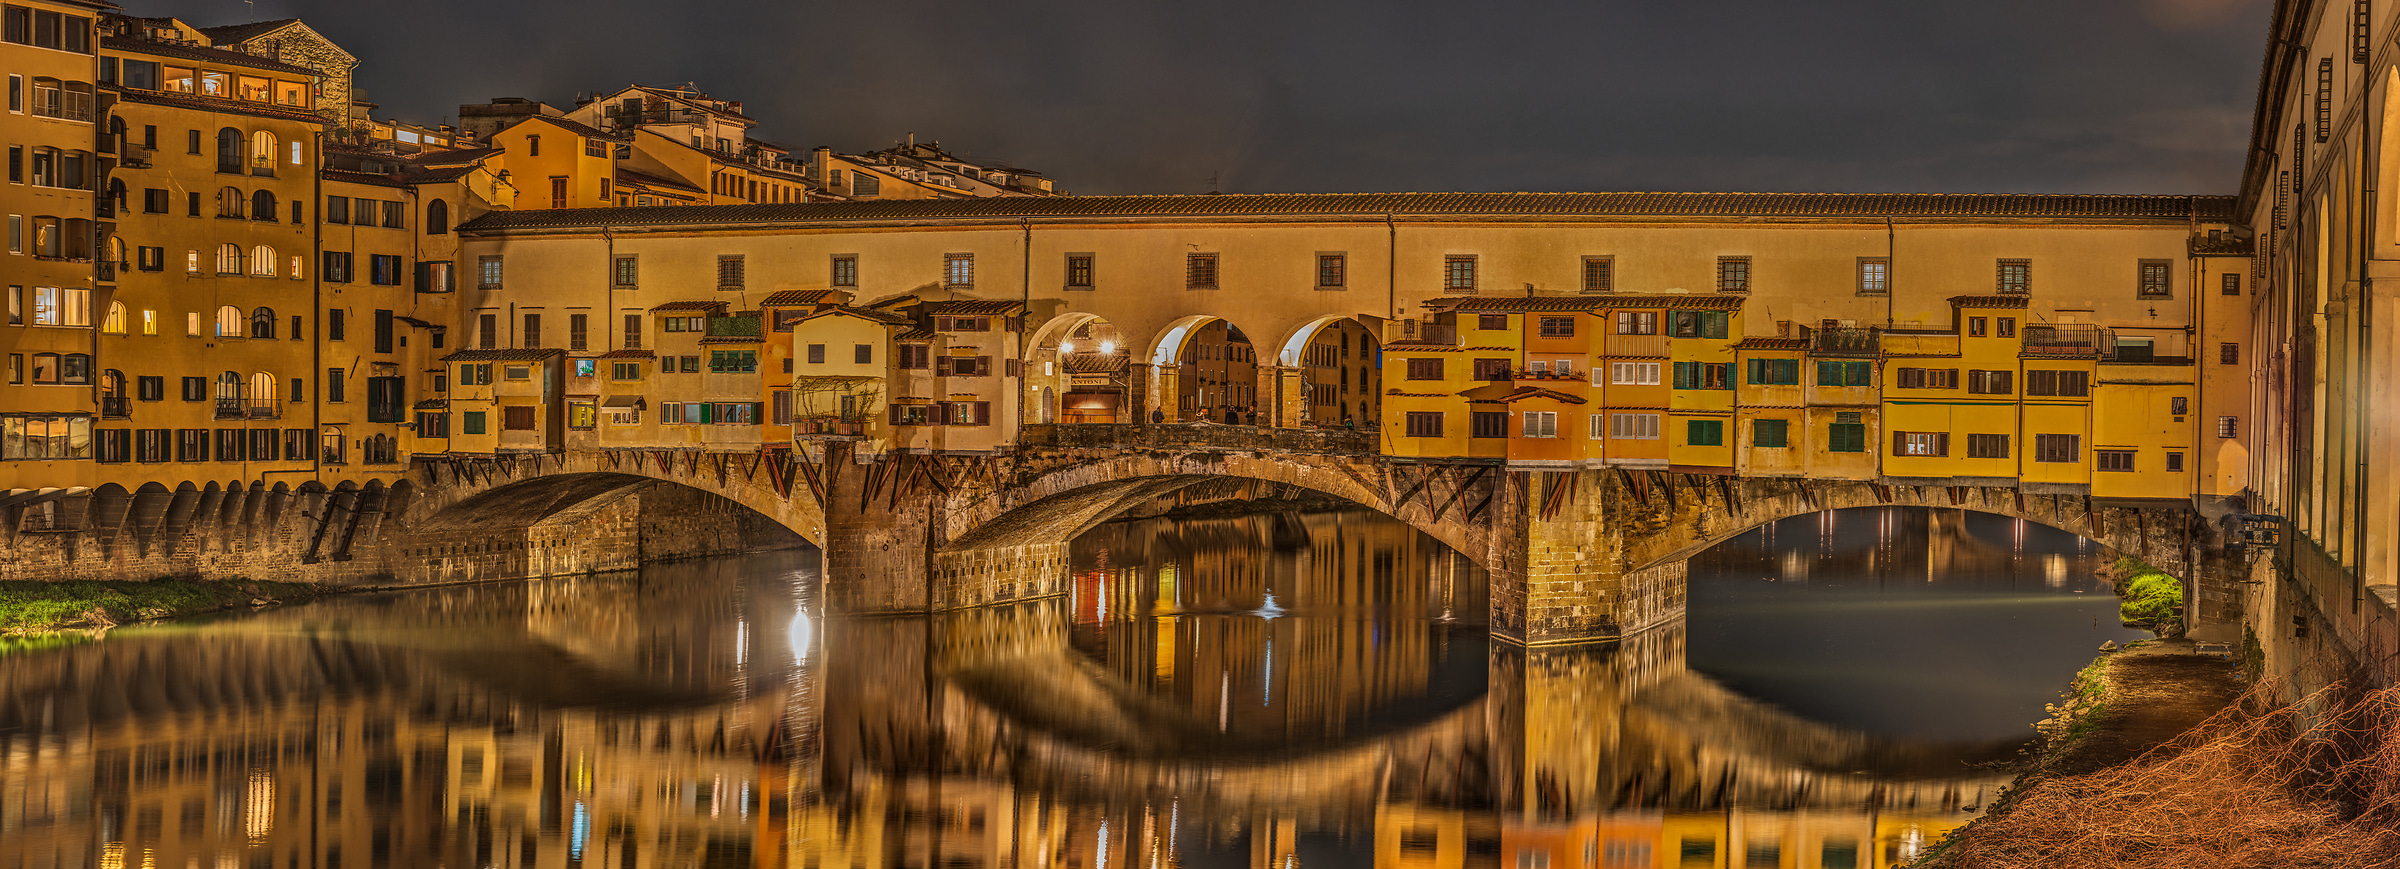 502 megapixels! A very high resolution, large-format VAST photo print of the Ponte Vecchio at night; photograph created by Alfred Feil in Ponte Vecchio, Florence, Italy.